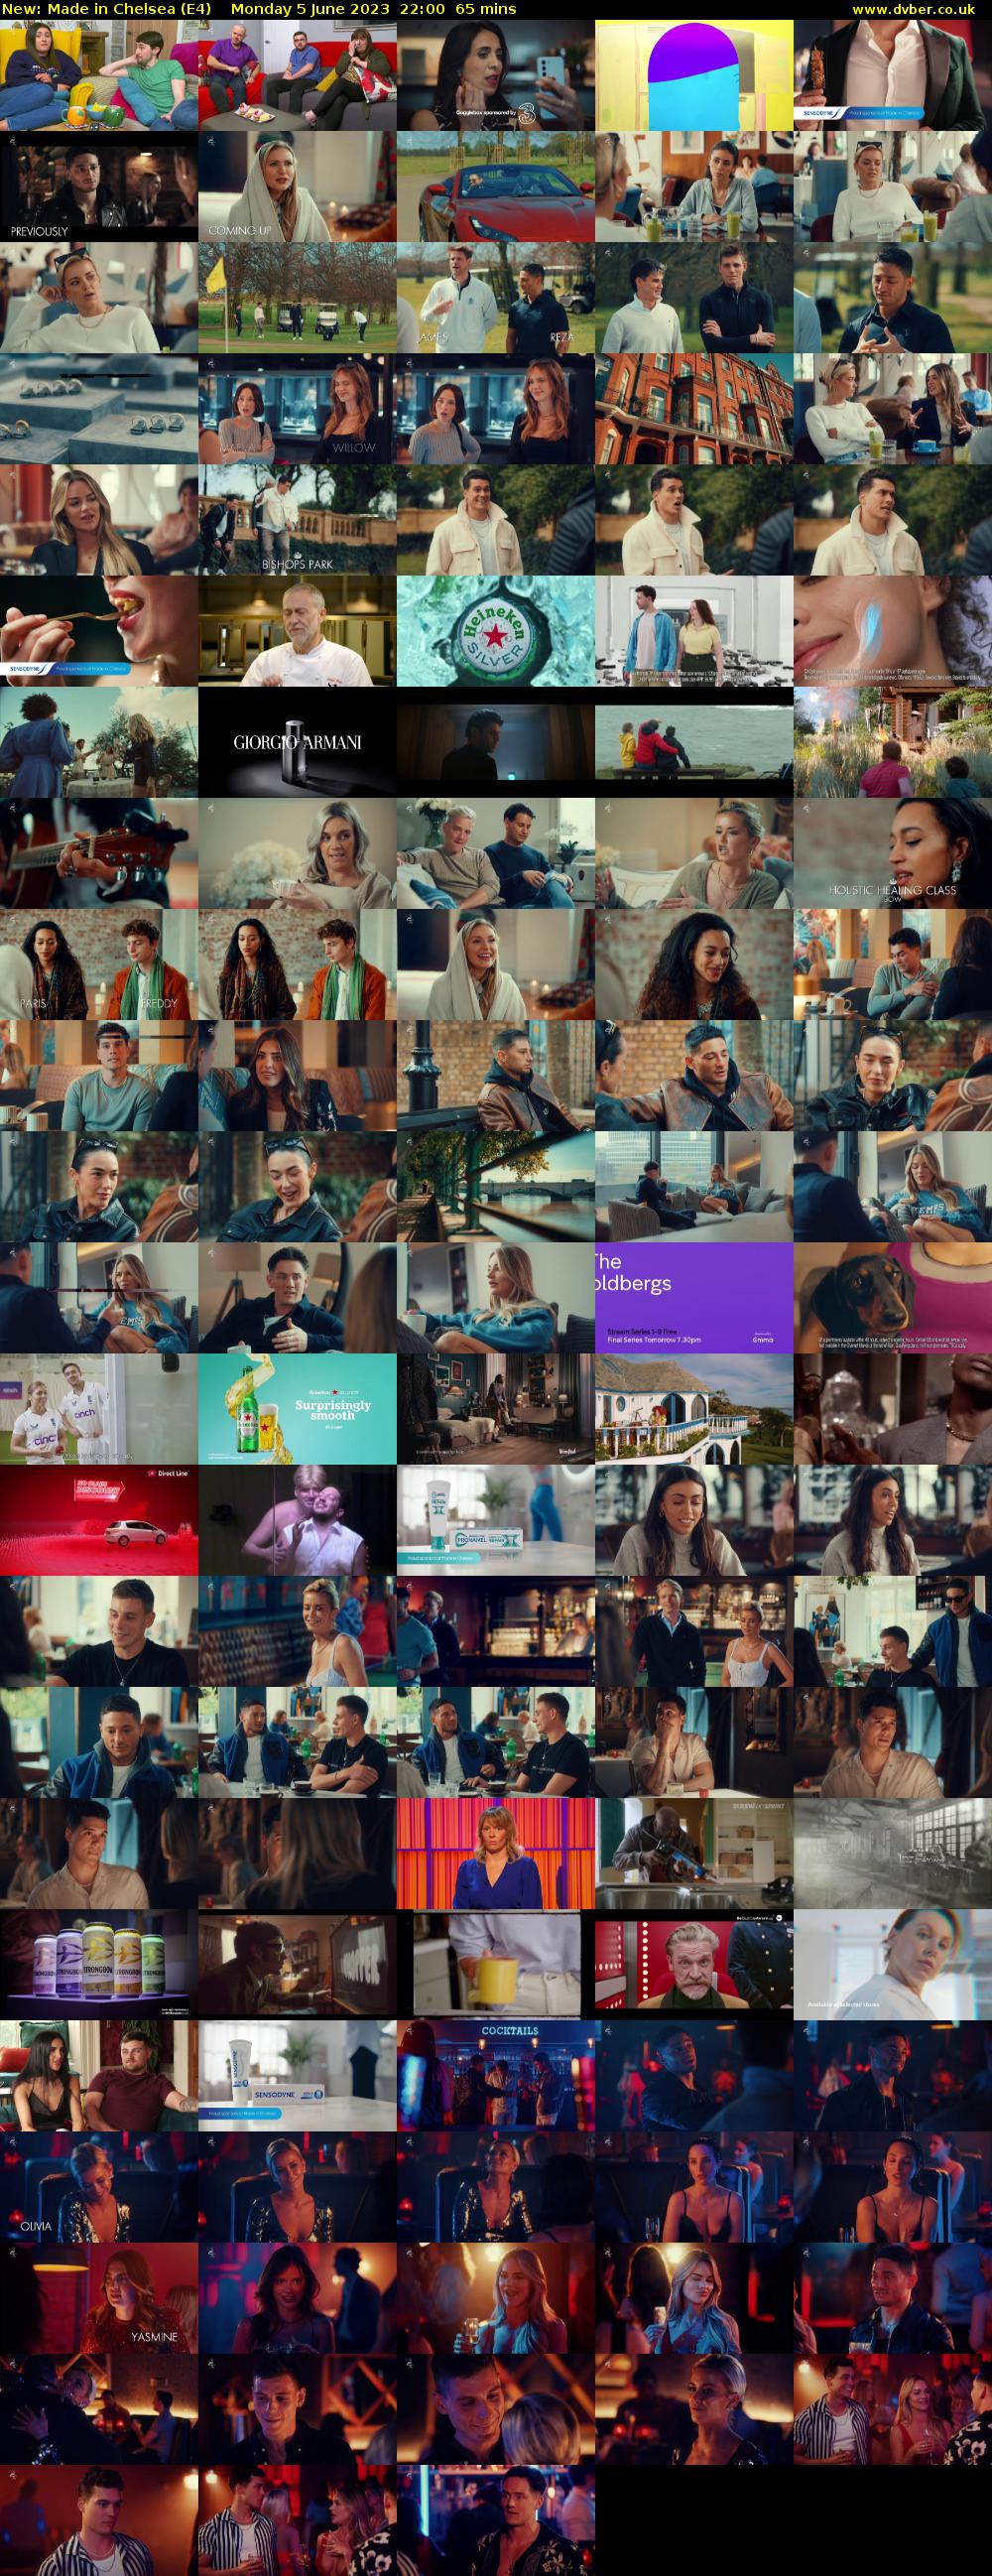 Made in Chelsea (E4) Monday 5 June 2023 22:00 - 23:05